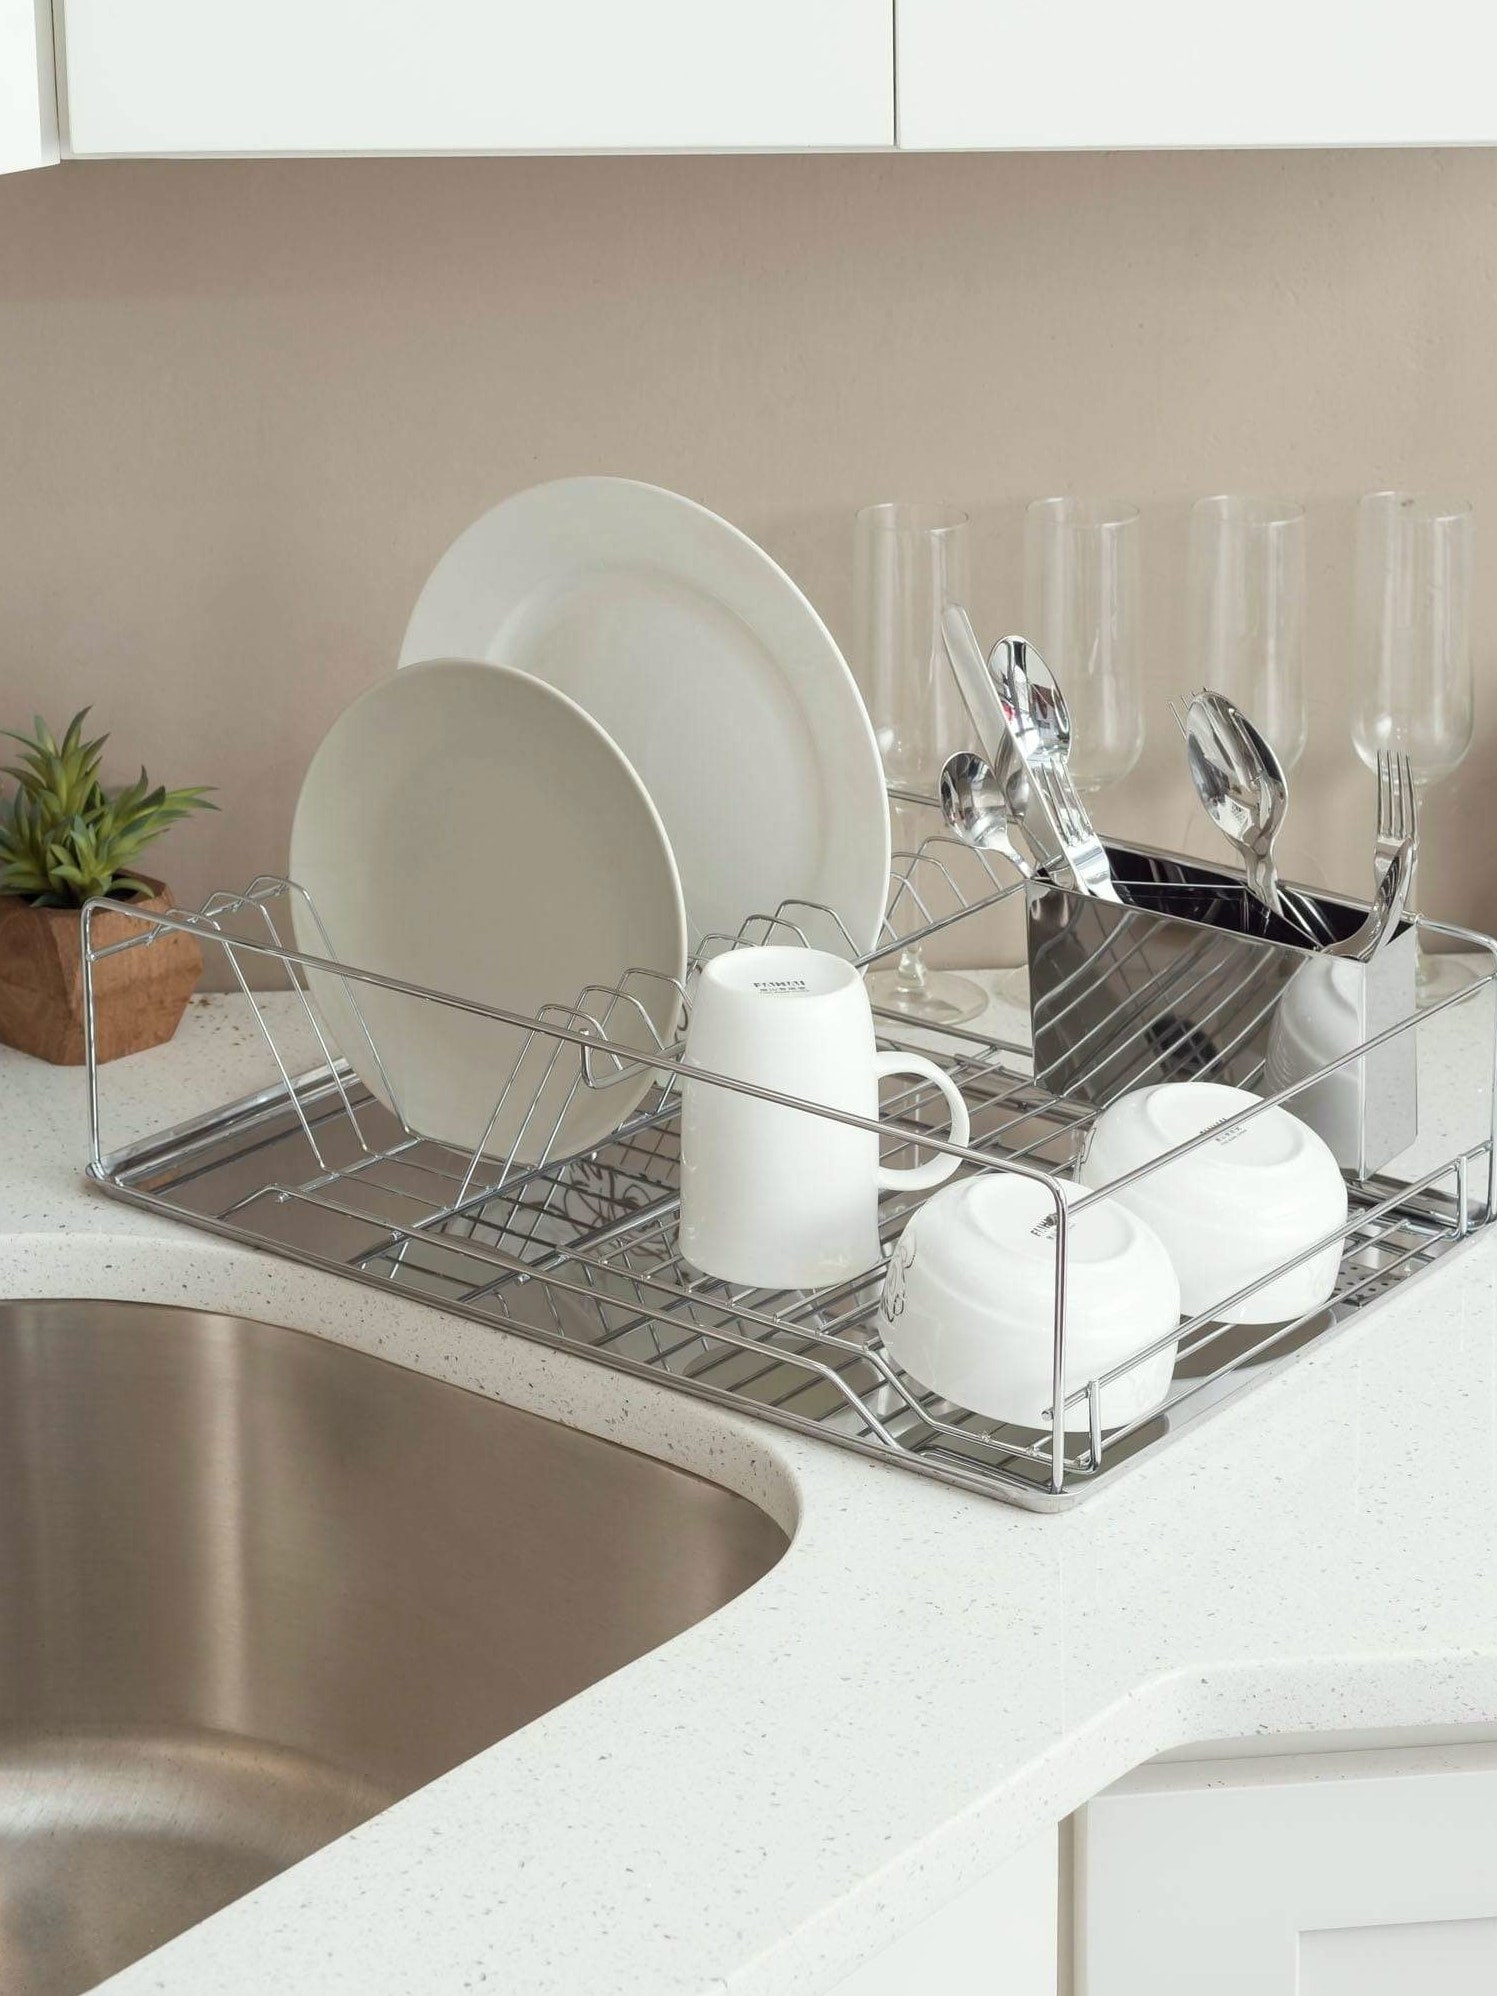 Chrome Plated Steel Dish Rack with Tray placed on counter near sink